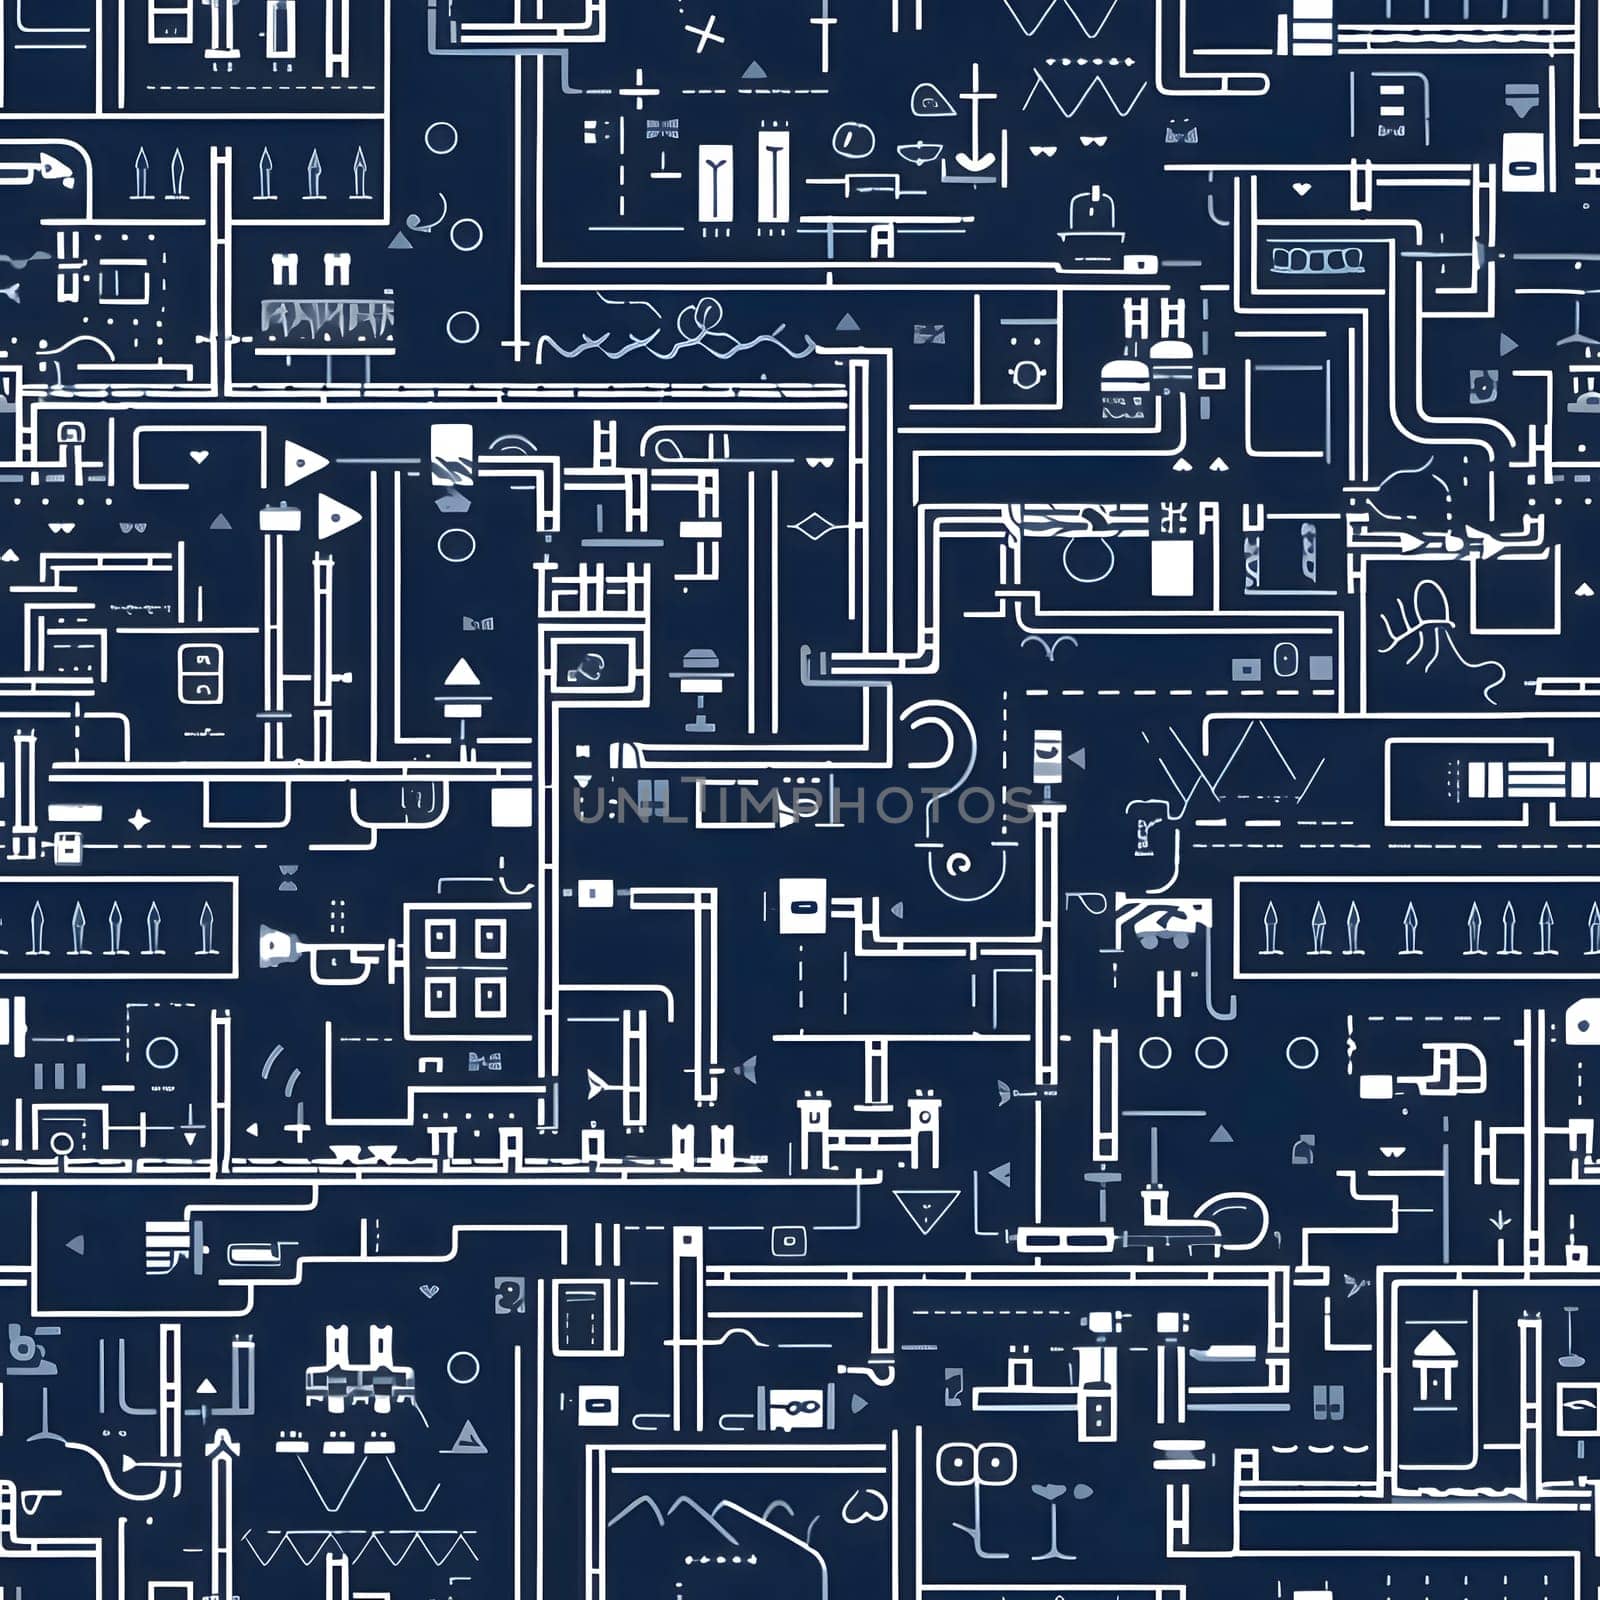 Patterns and banners backgrounds: Seamless pattern with construction drawings on a dark blue background.